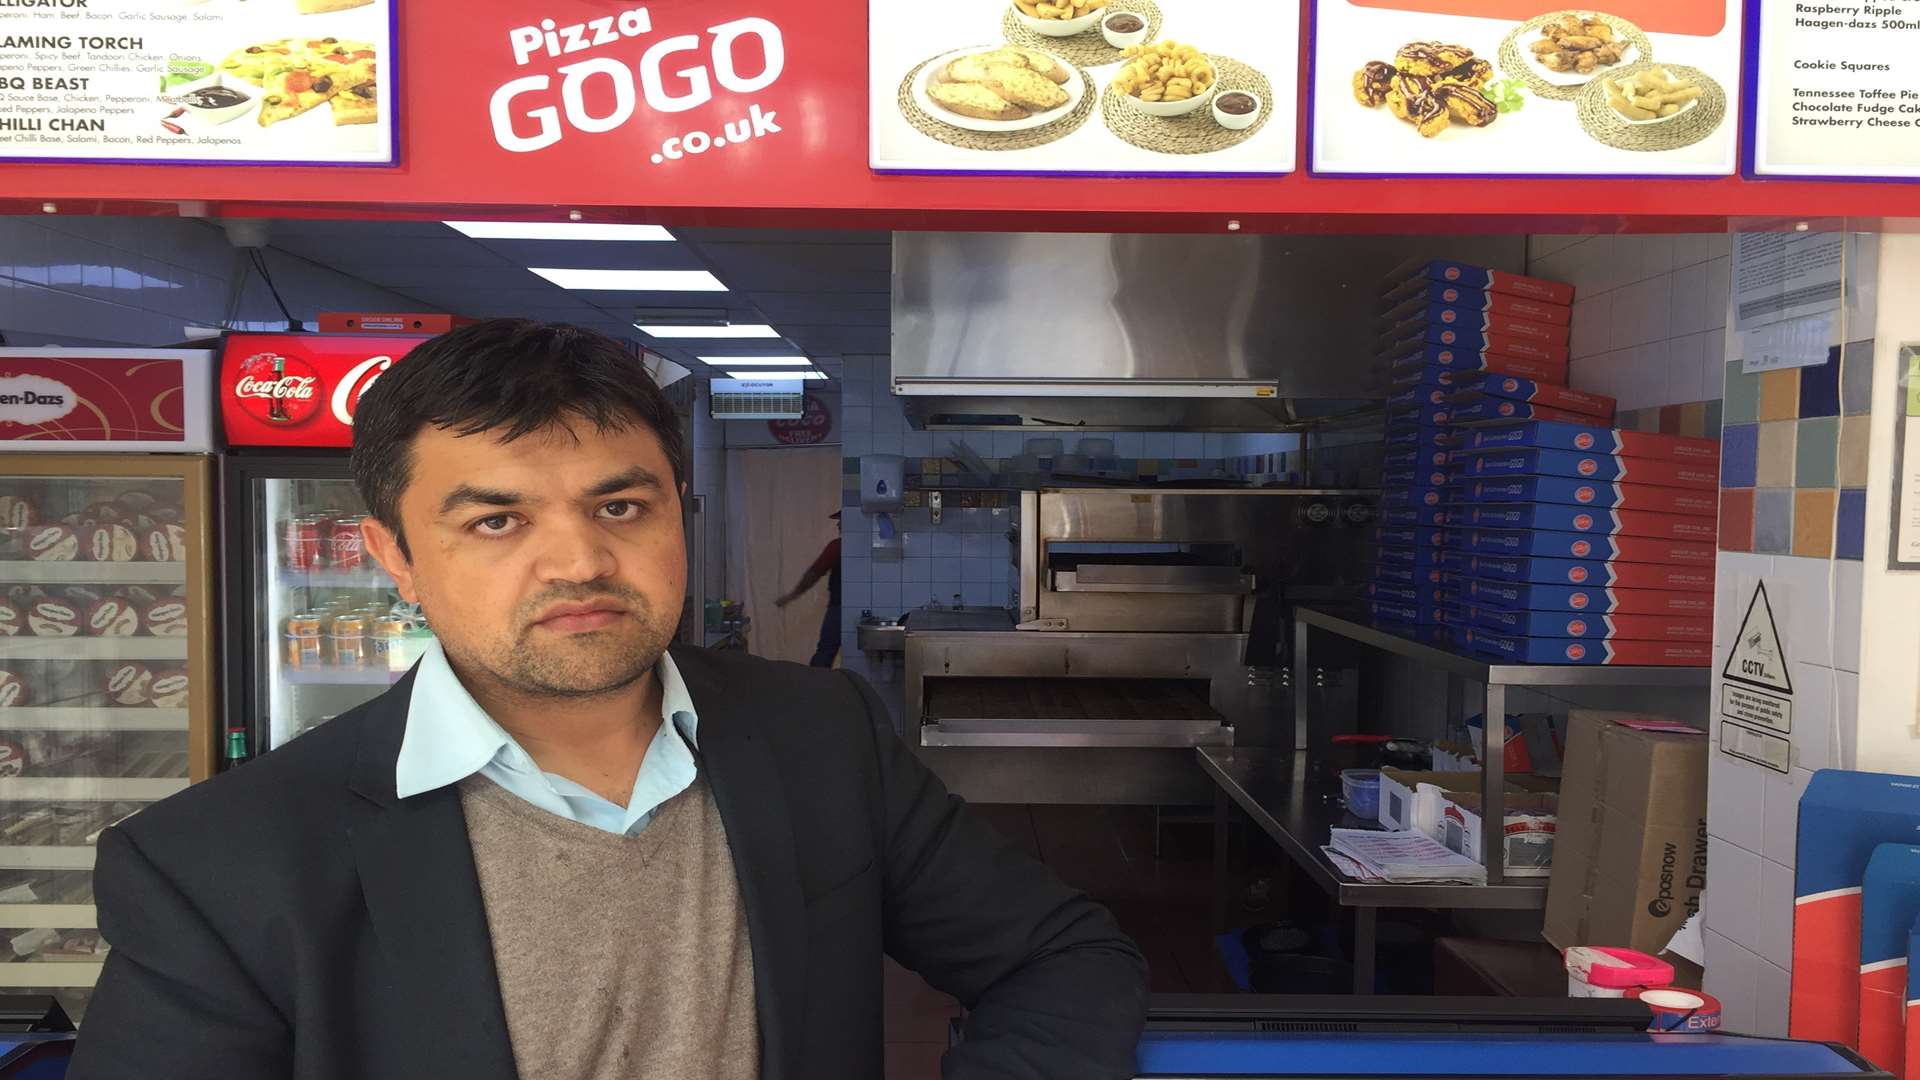 Pizza GOGO, in New Road, Gravesend, which was broken into. Franchise owner Ali Mushtaq.